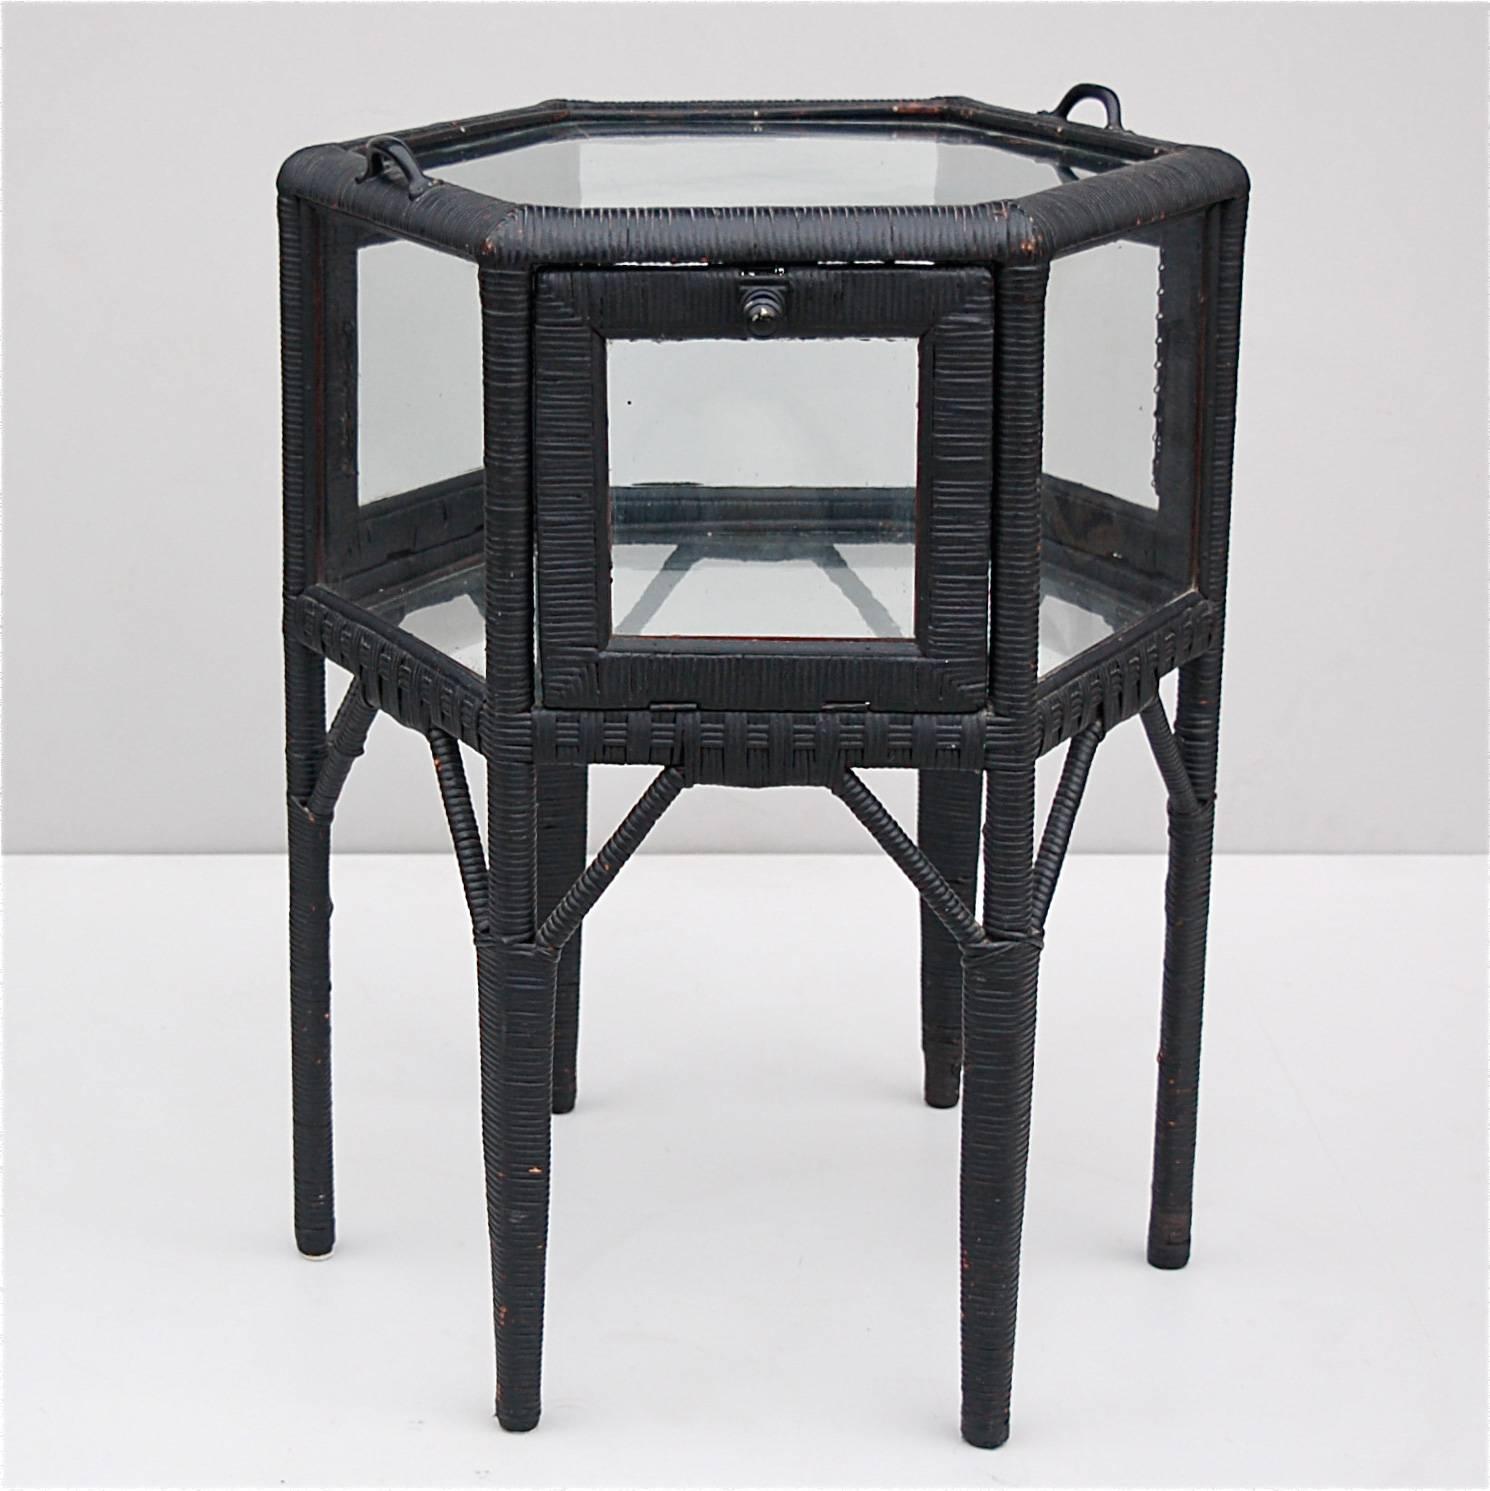 Highly unusual side table that also doubles as a vitrine, console or display table. The top part is a display case with six glass side panels of which three open to give access to the main body of the unit. The glass is very thick and handmade. The